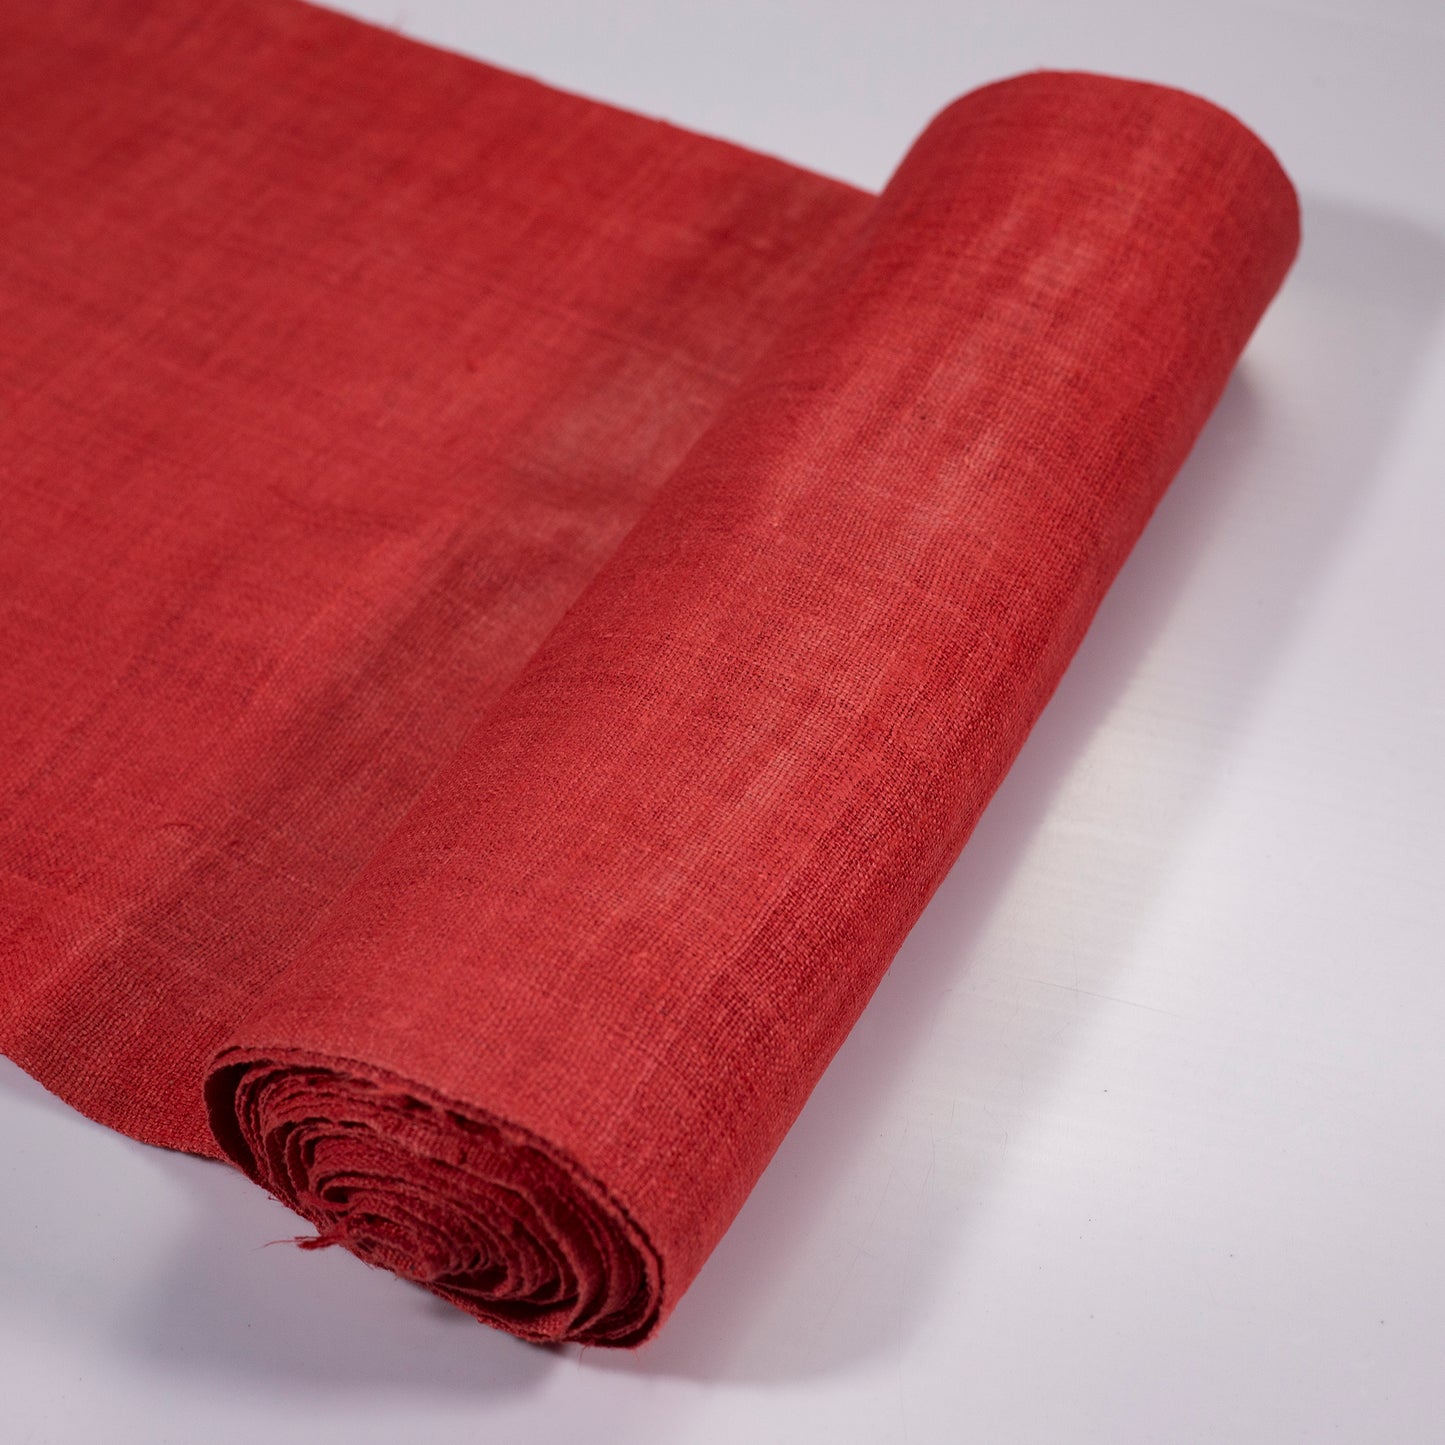 Raw hemp, natural color in RED